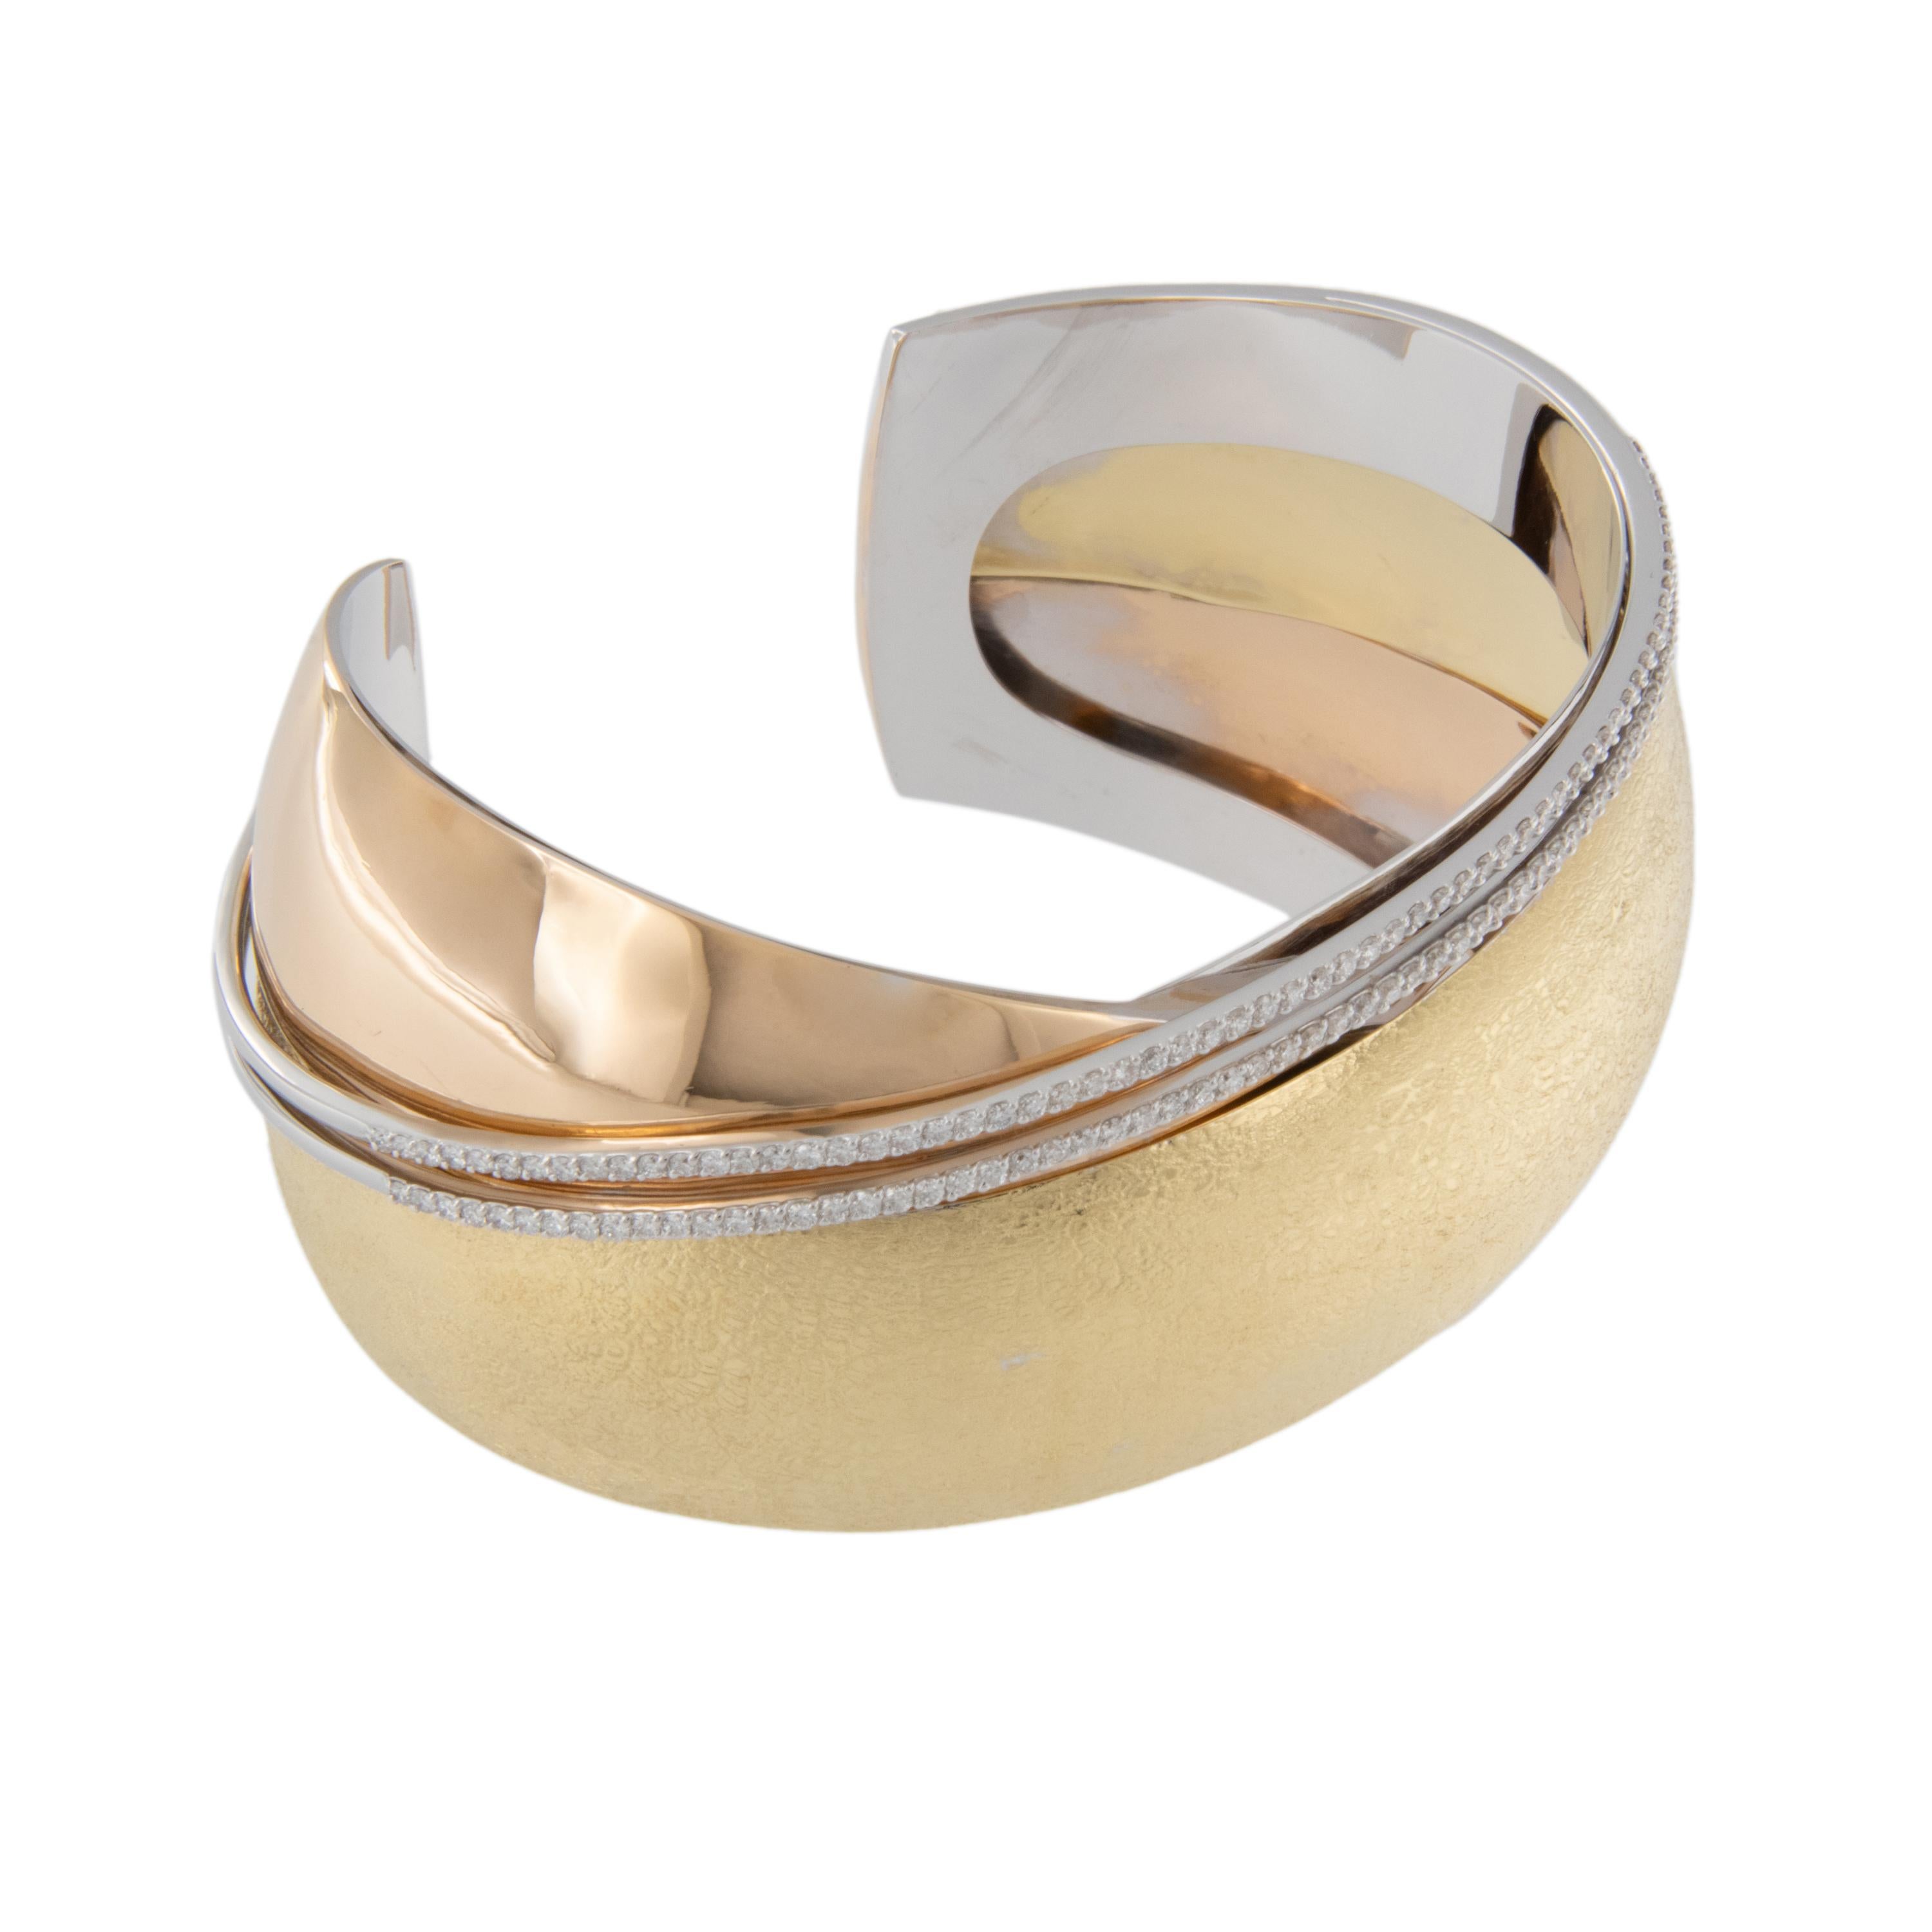 Multi colors and multi textures make this modern crossover designed bracelet stand out from the rest! Made of rich 18 karat yellow gold and convenient cuff design accented with 1.04 Cttw diamonds in 2 rows this bracelet is a knockout! Complimentary